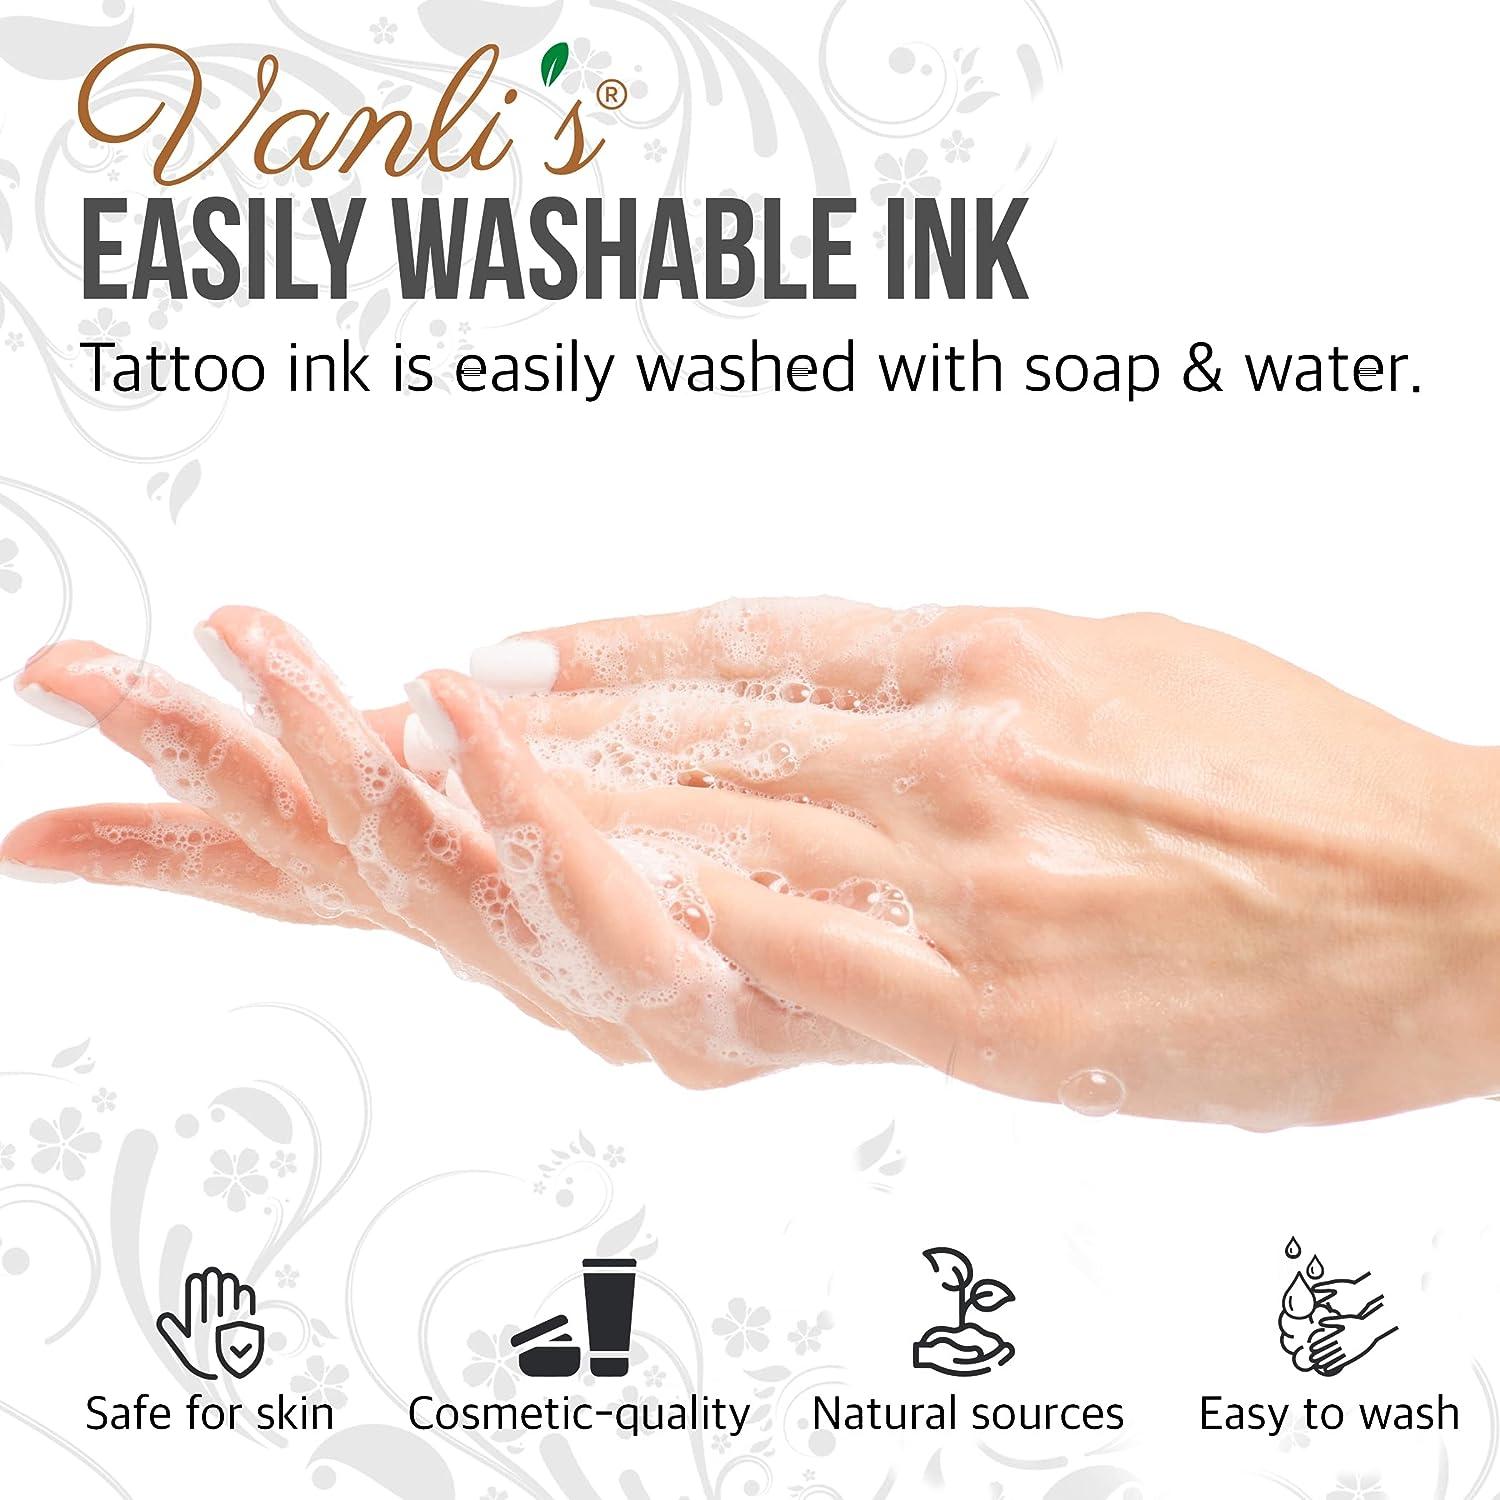 Vanli's Temporary Tattoo Markers for Skin With 30 Unique Tattoo Stenci –  TweezerCo